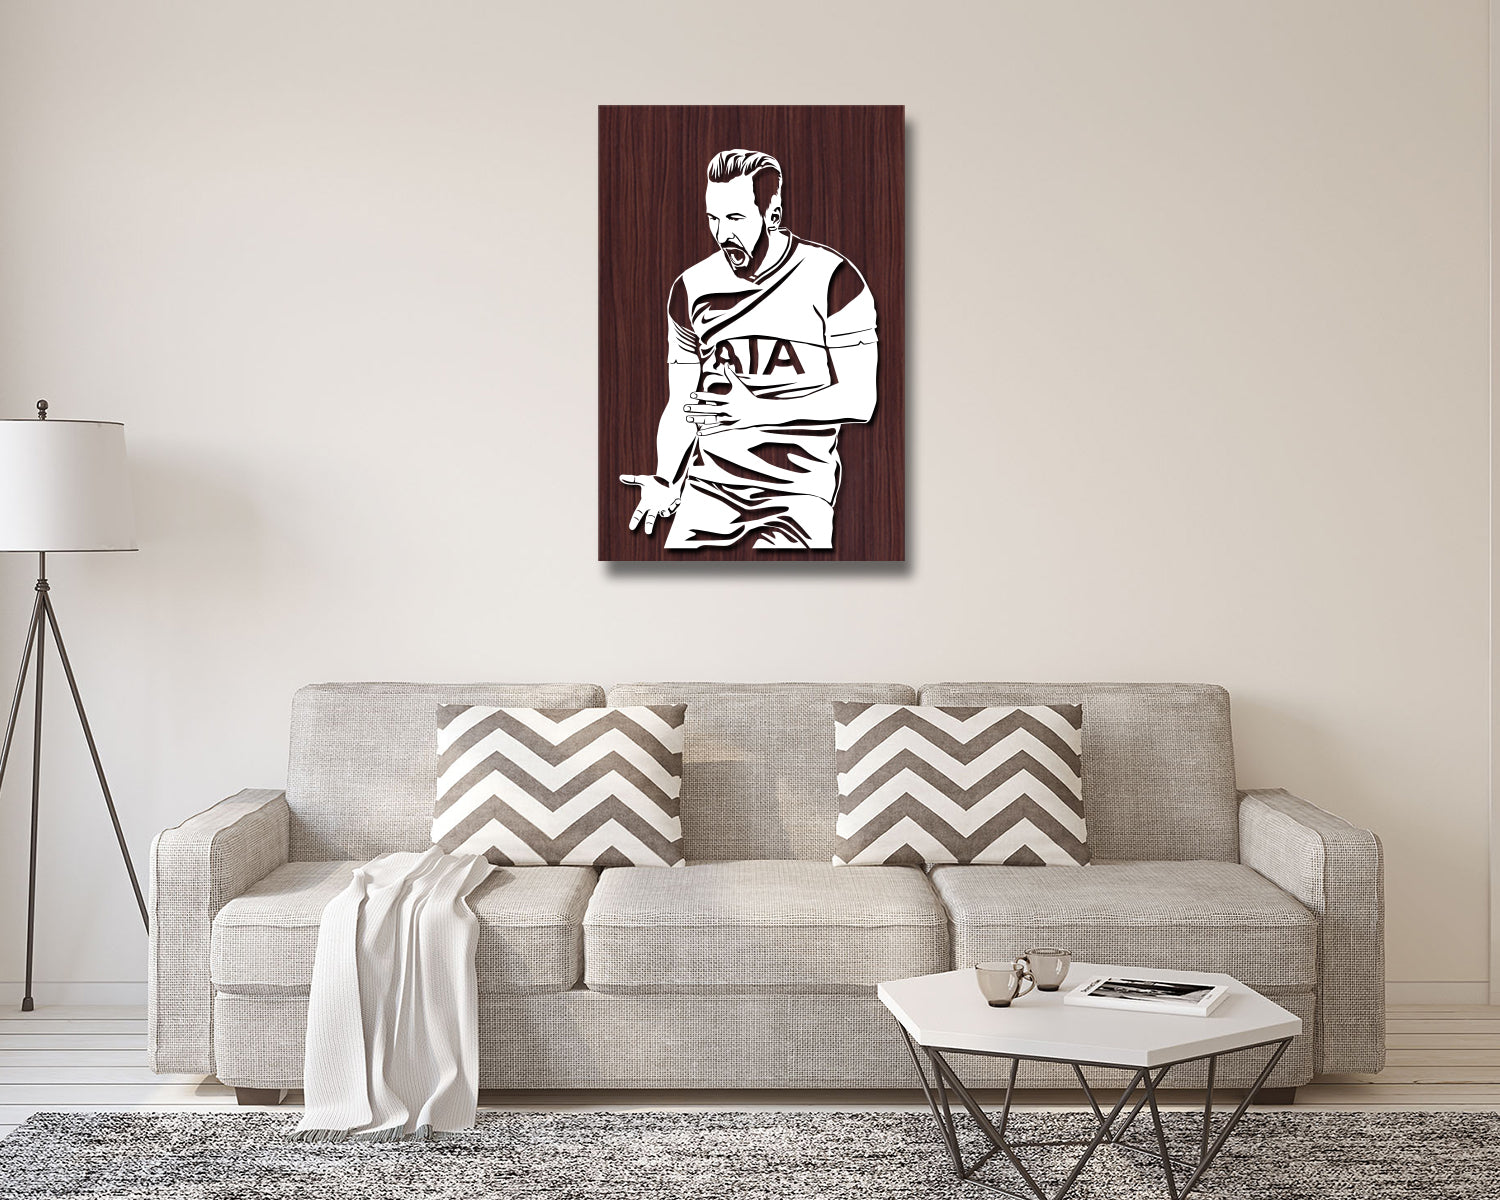 Harry Kane LED Wooden Decal 